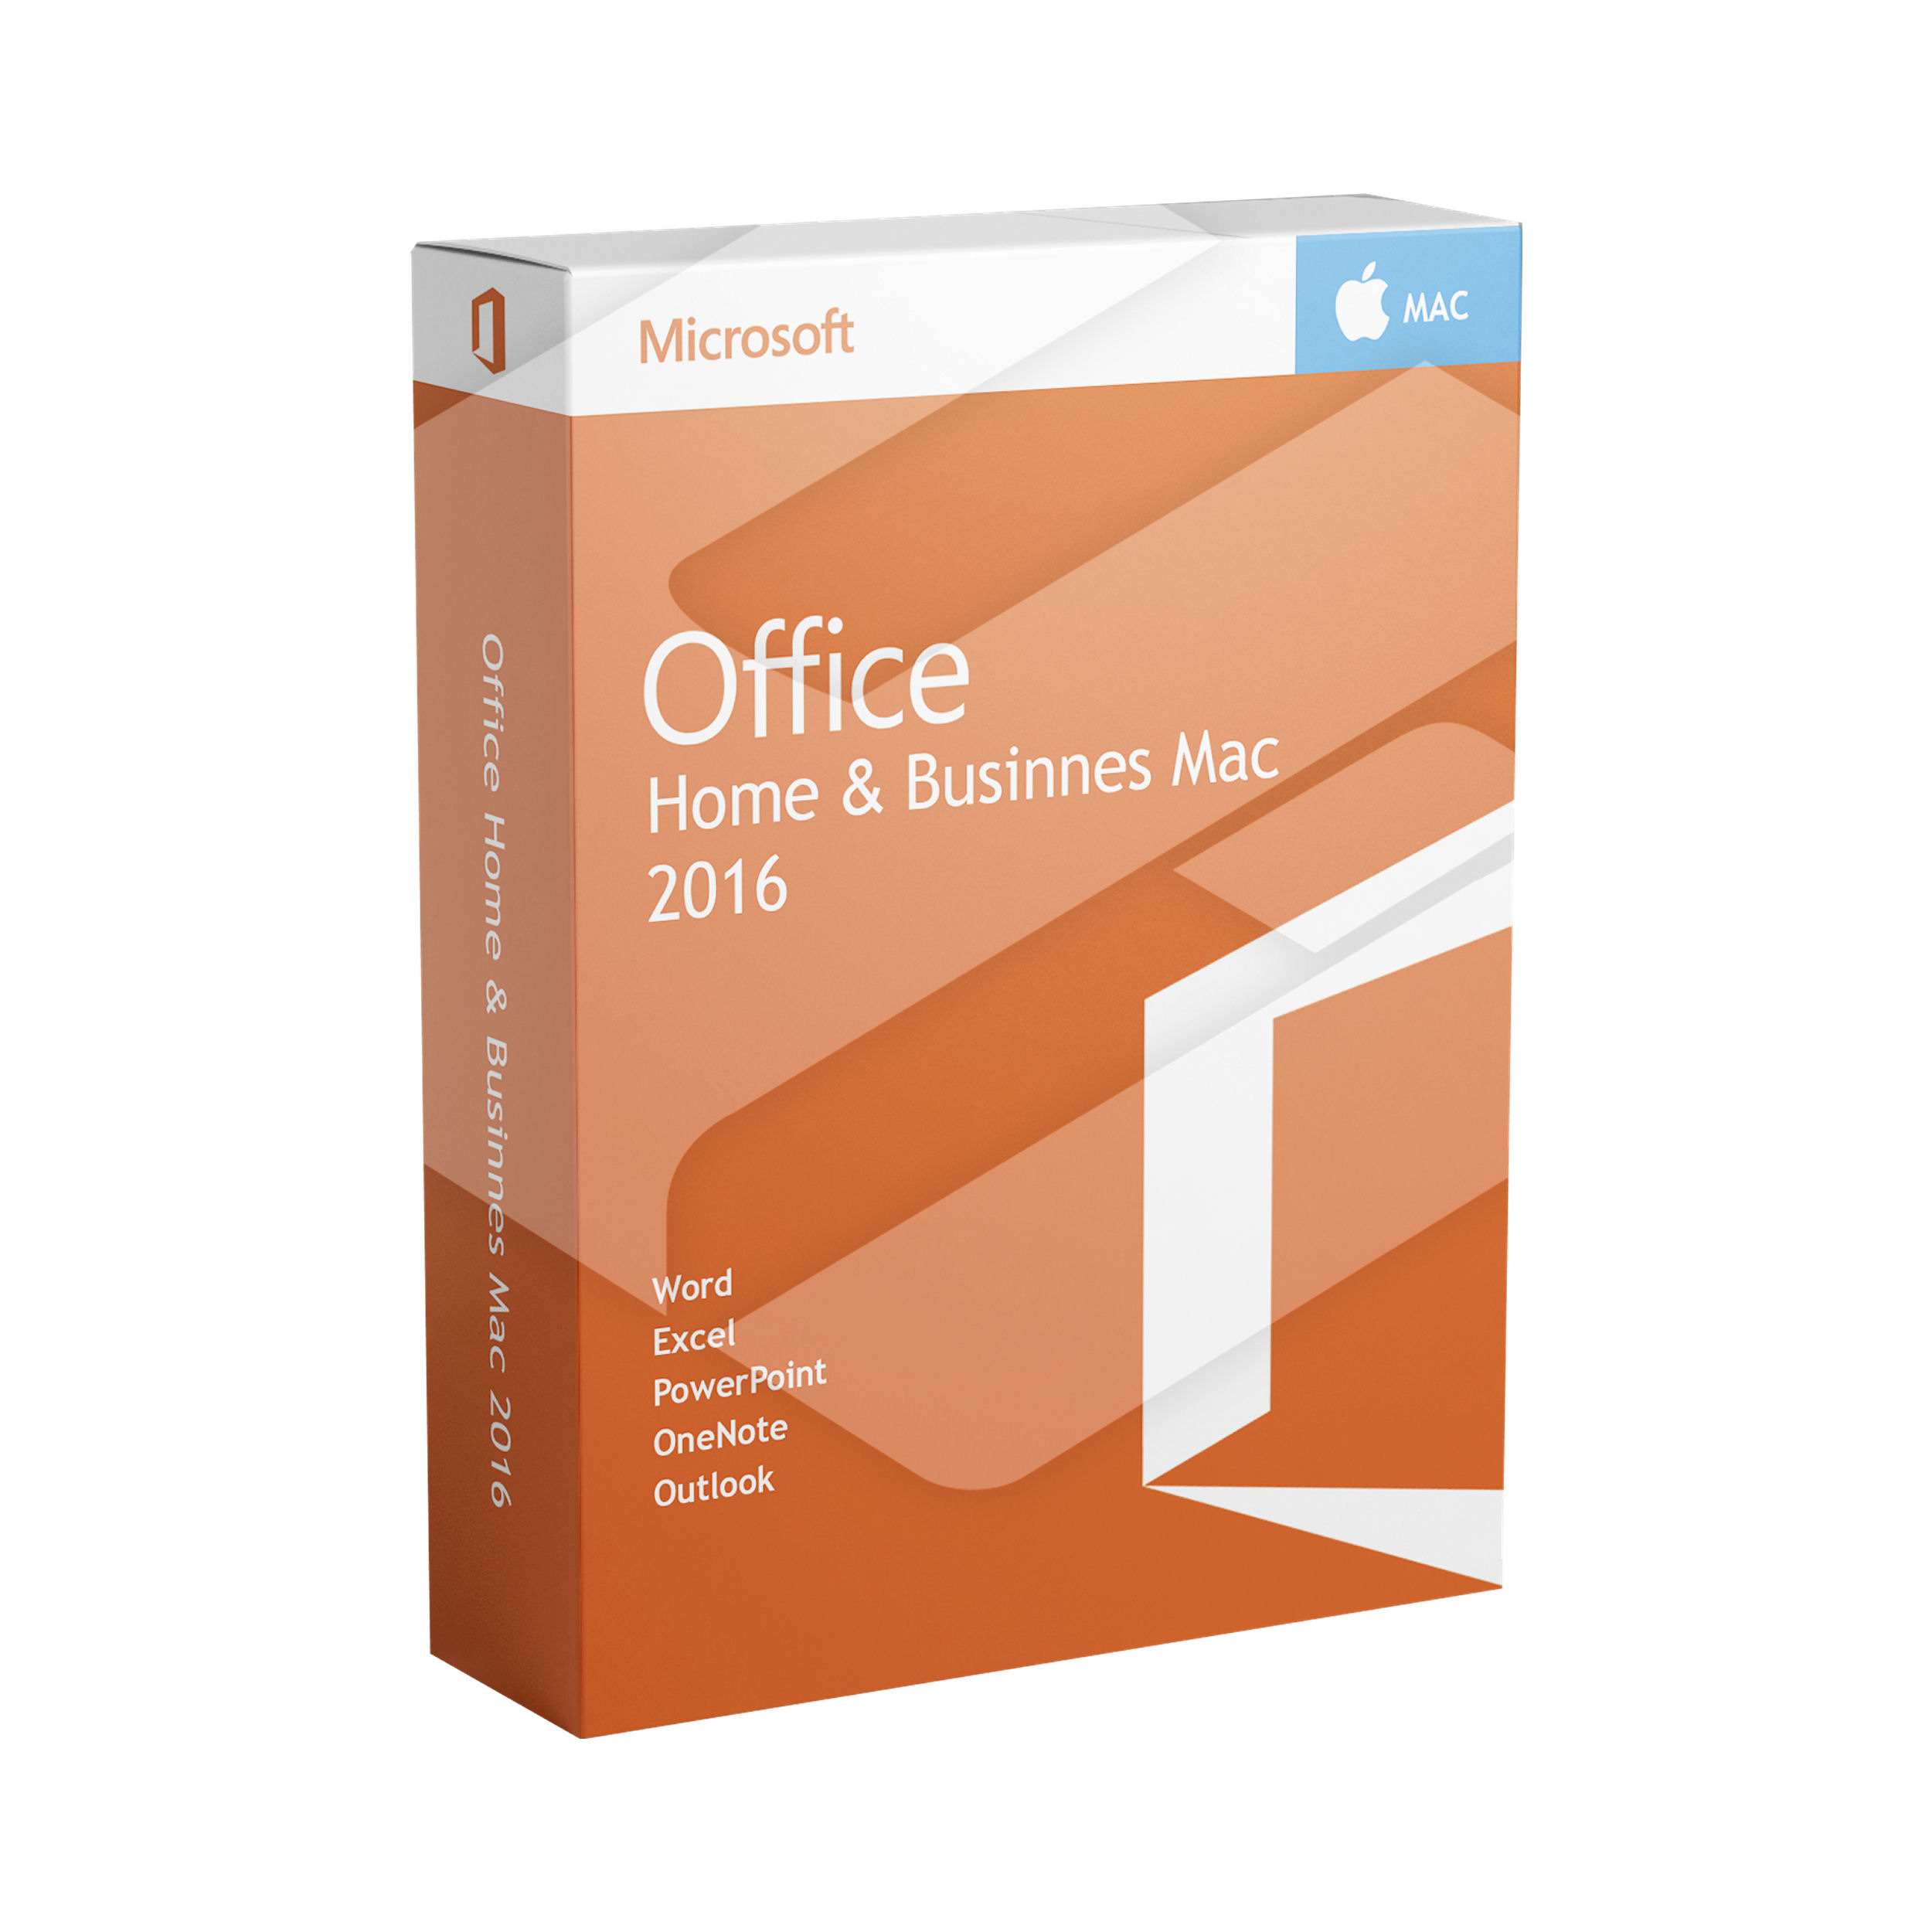 Microsoft Office 2016 for MAC Home & Business